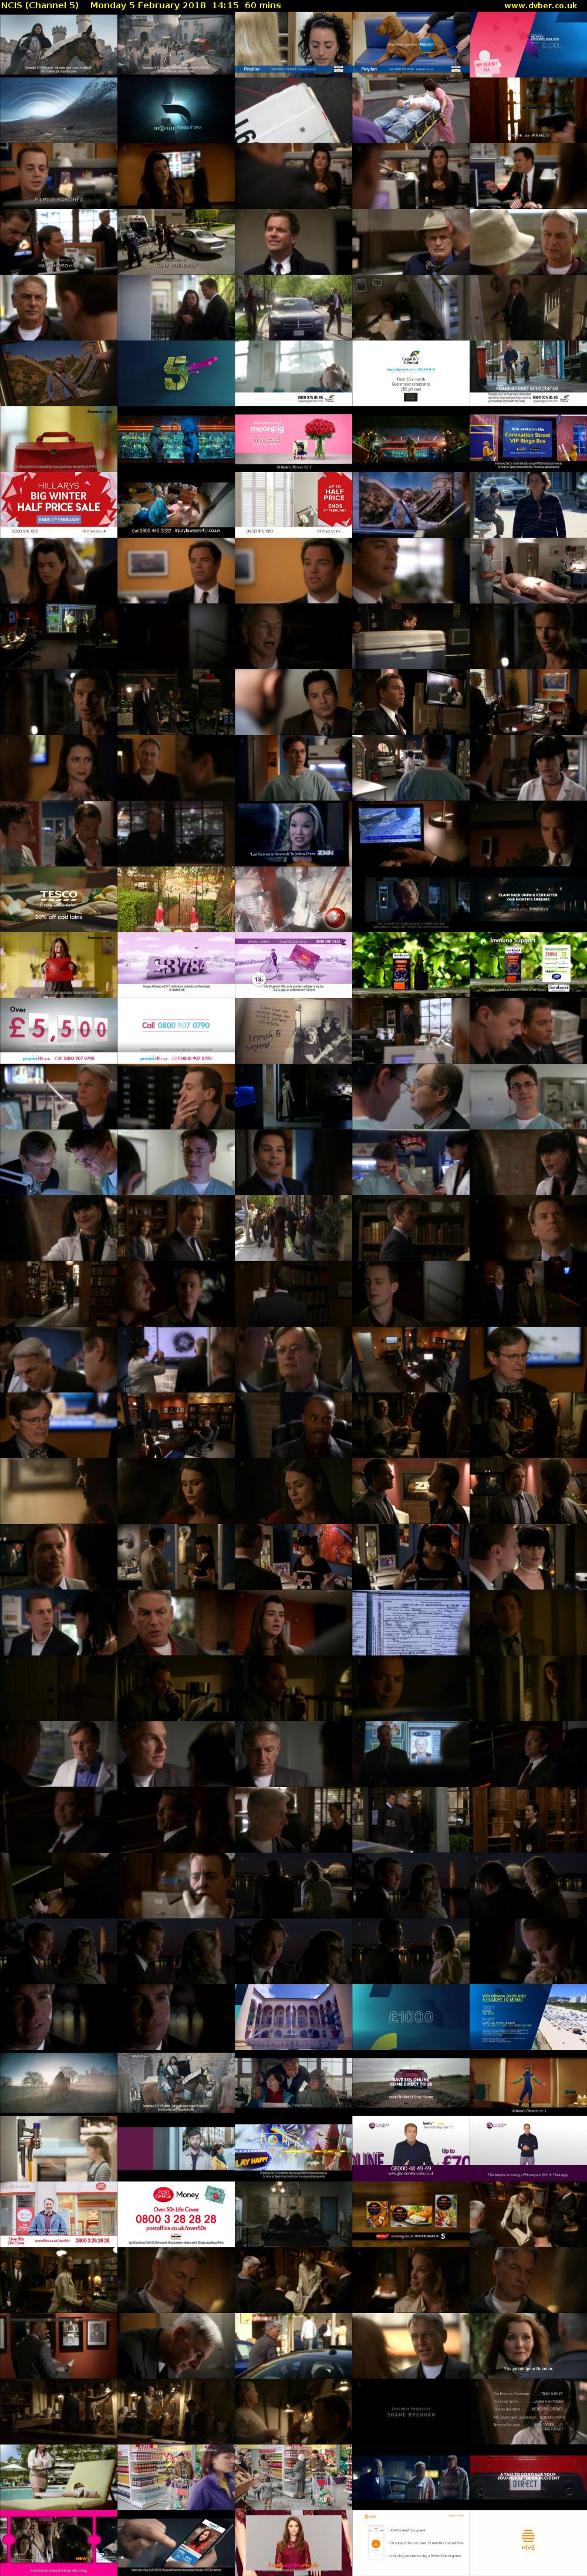 NCIS (Channel 5) Monday 5 February 2018 14:15 - 15:15